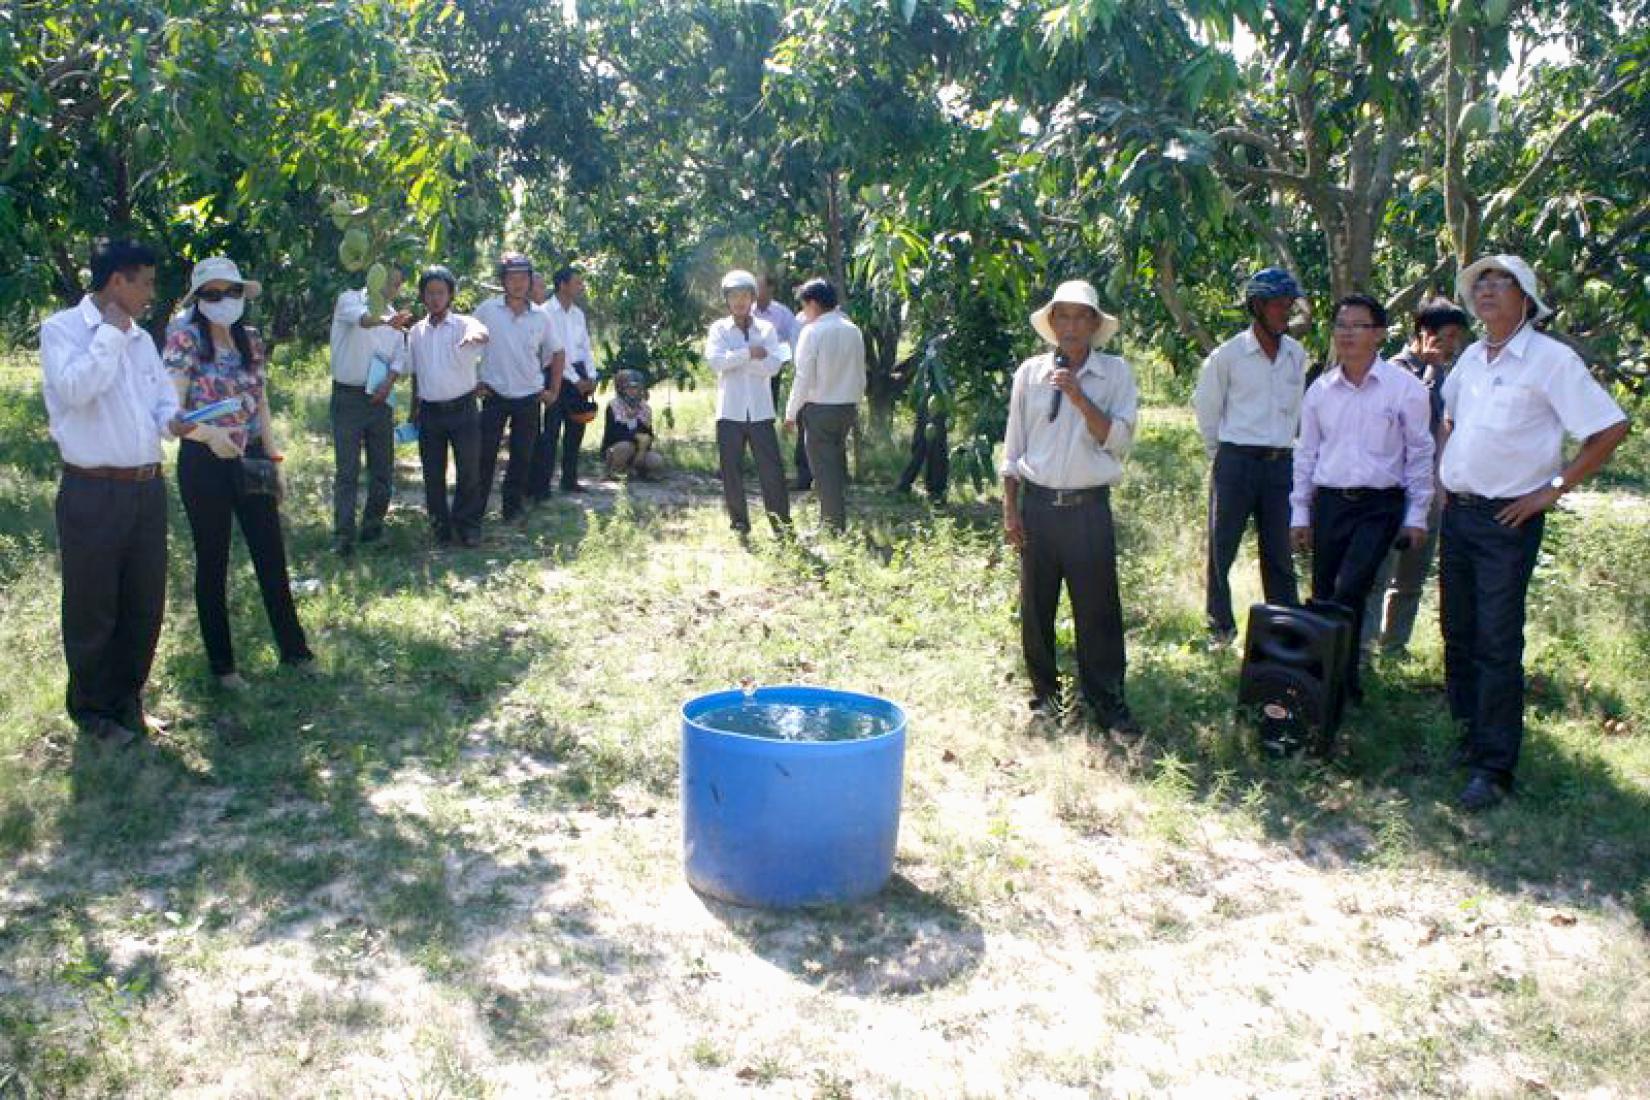 A group of people in a field looking a container of water for irrigation